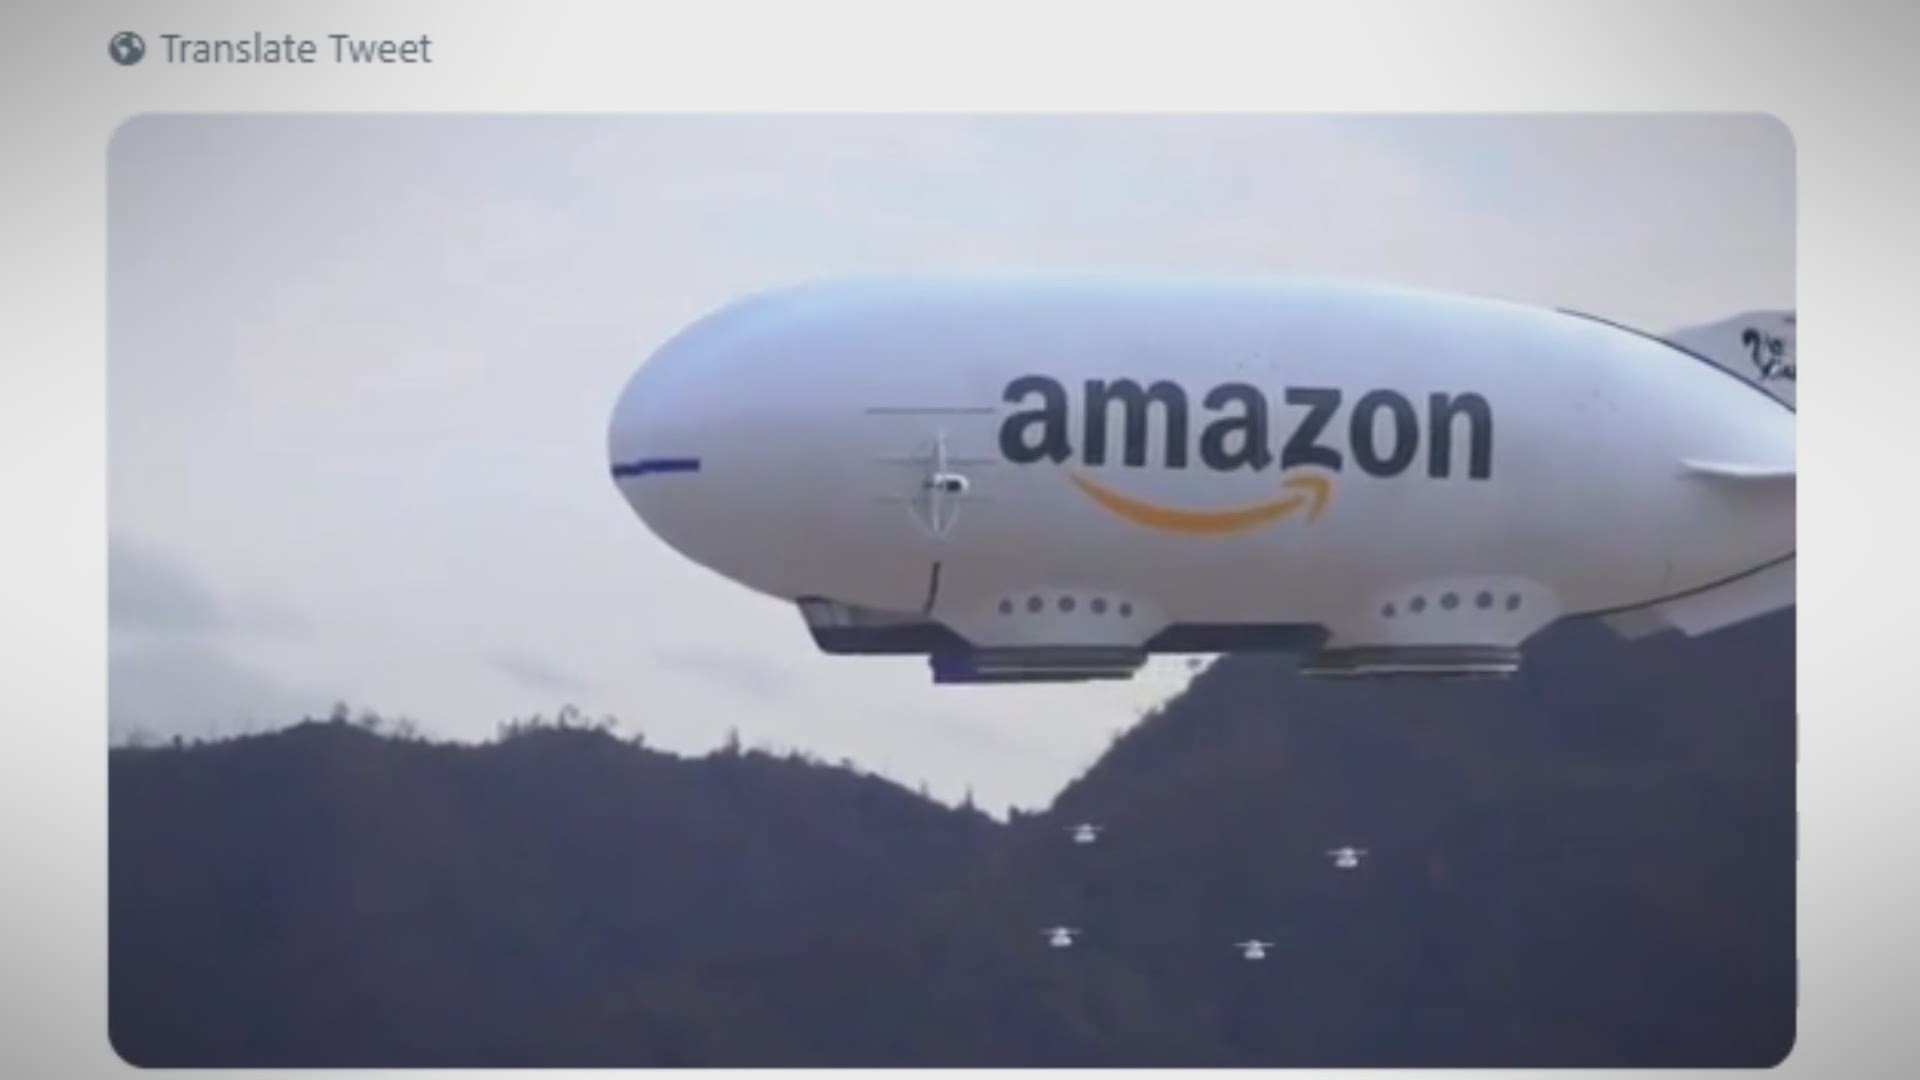 An April Fool's video stuck around on social media because of it's realistic editing of an Amazon drone ship. It's fake, but actually based on a real patent.